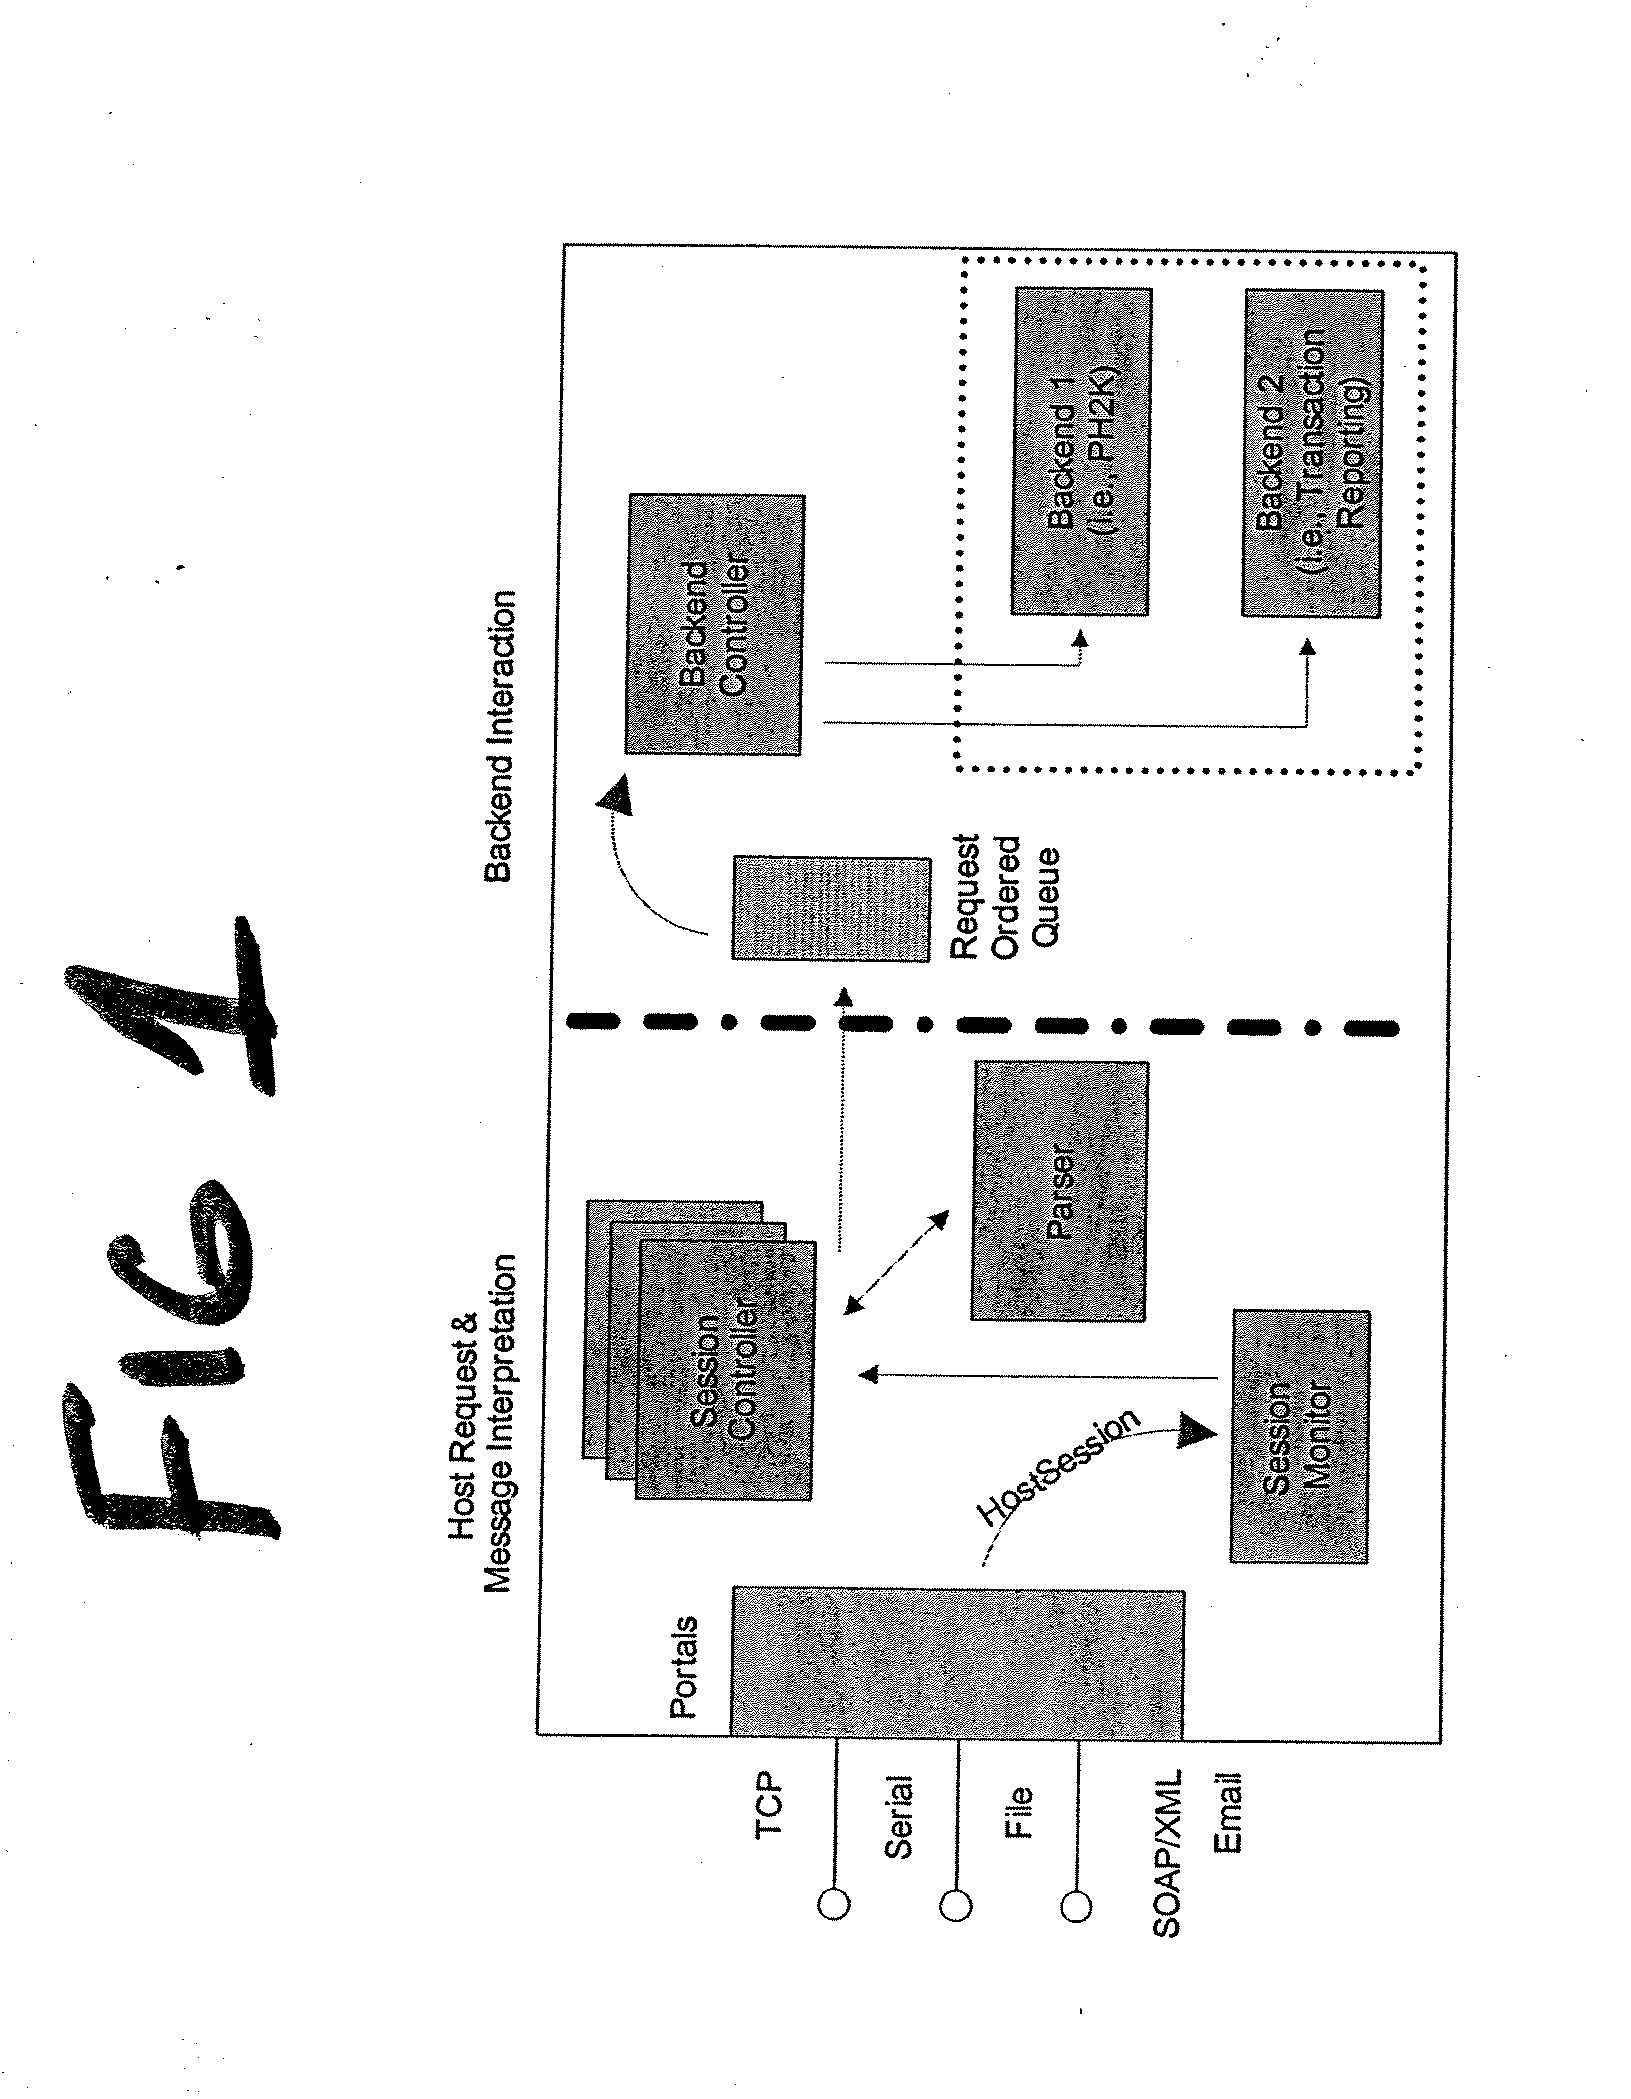 Adaptive interface for product dispensing systems